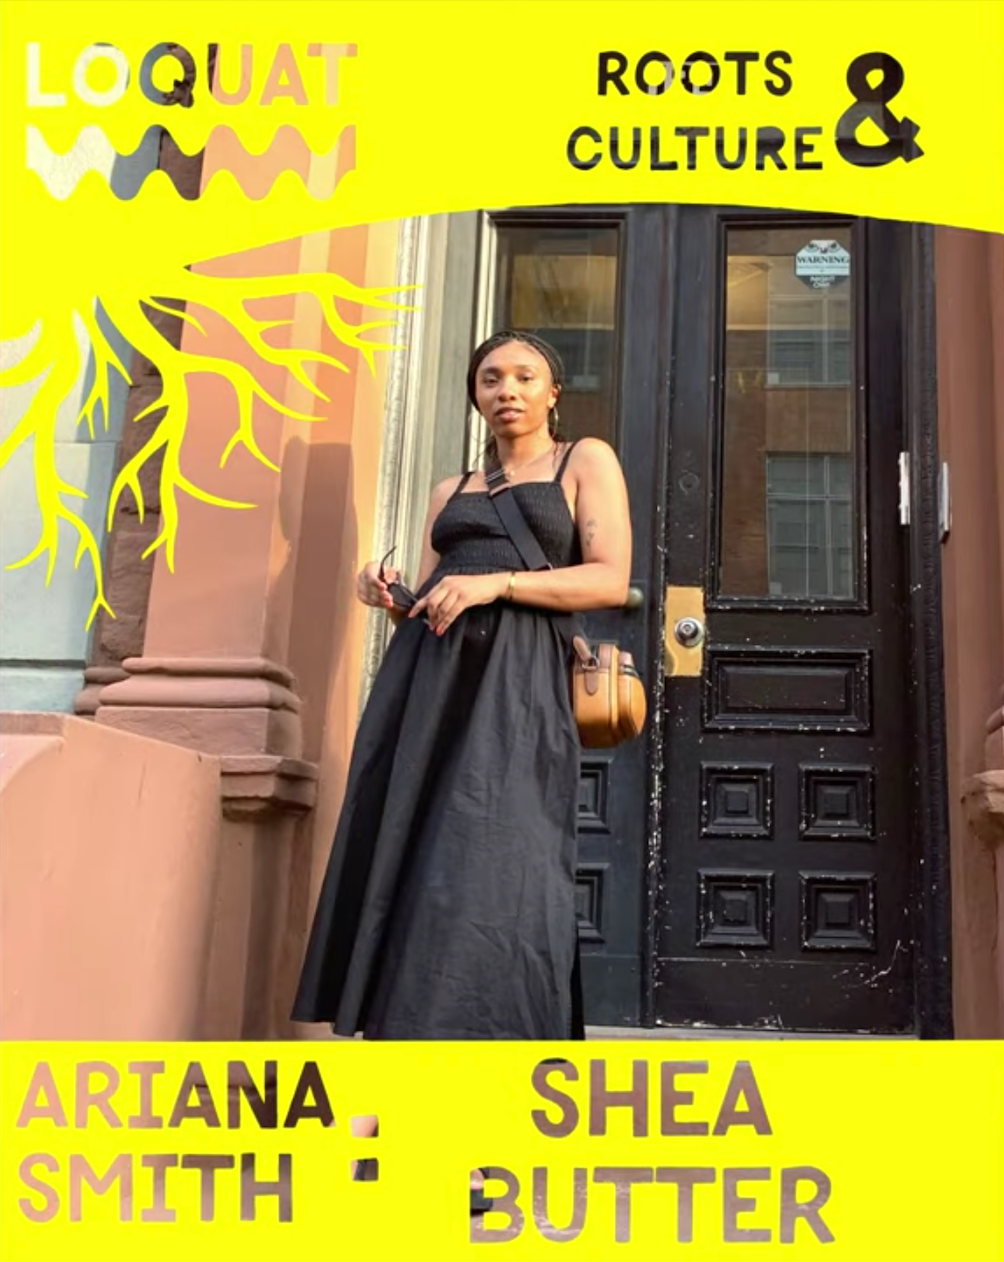 Roots & Culture: Shae Butter with Ariana Smith